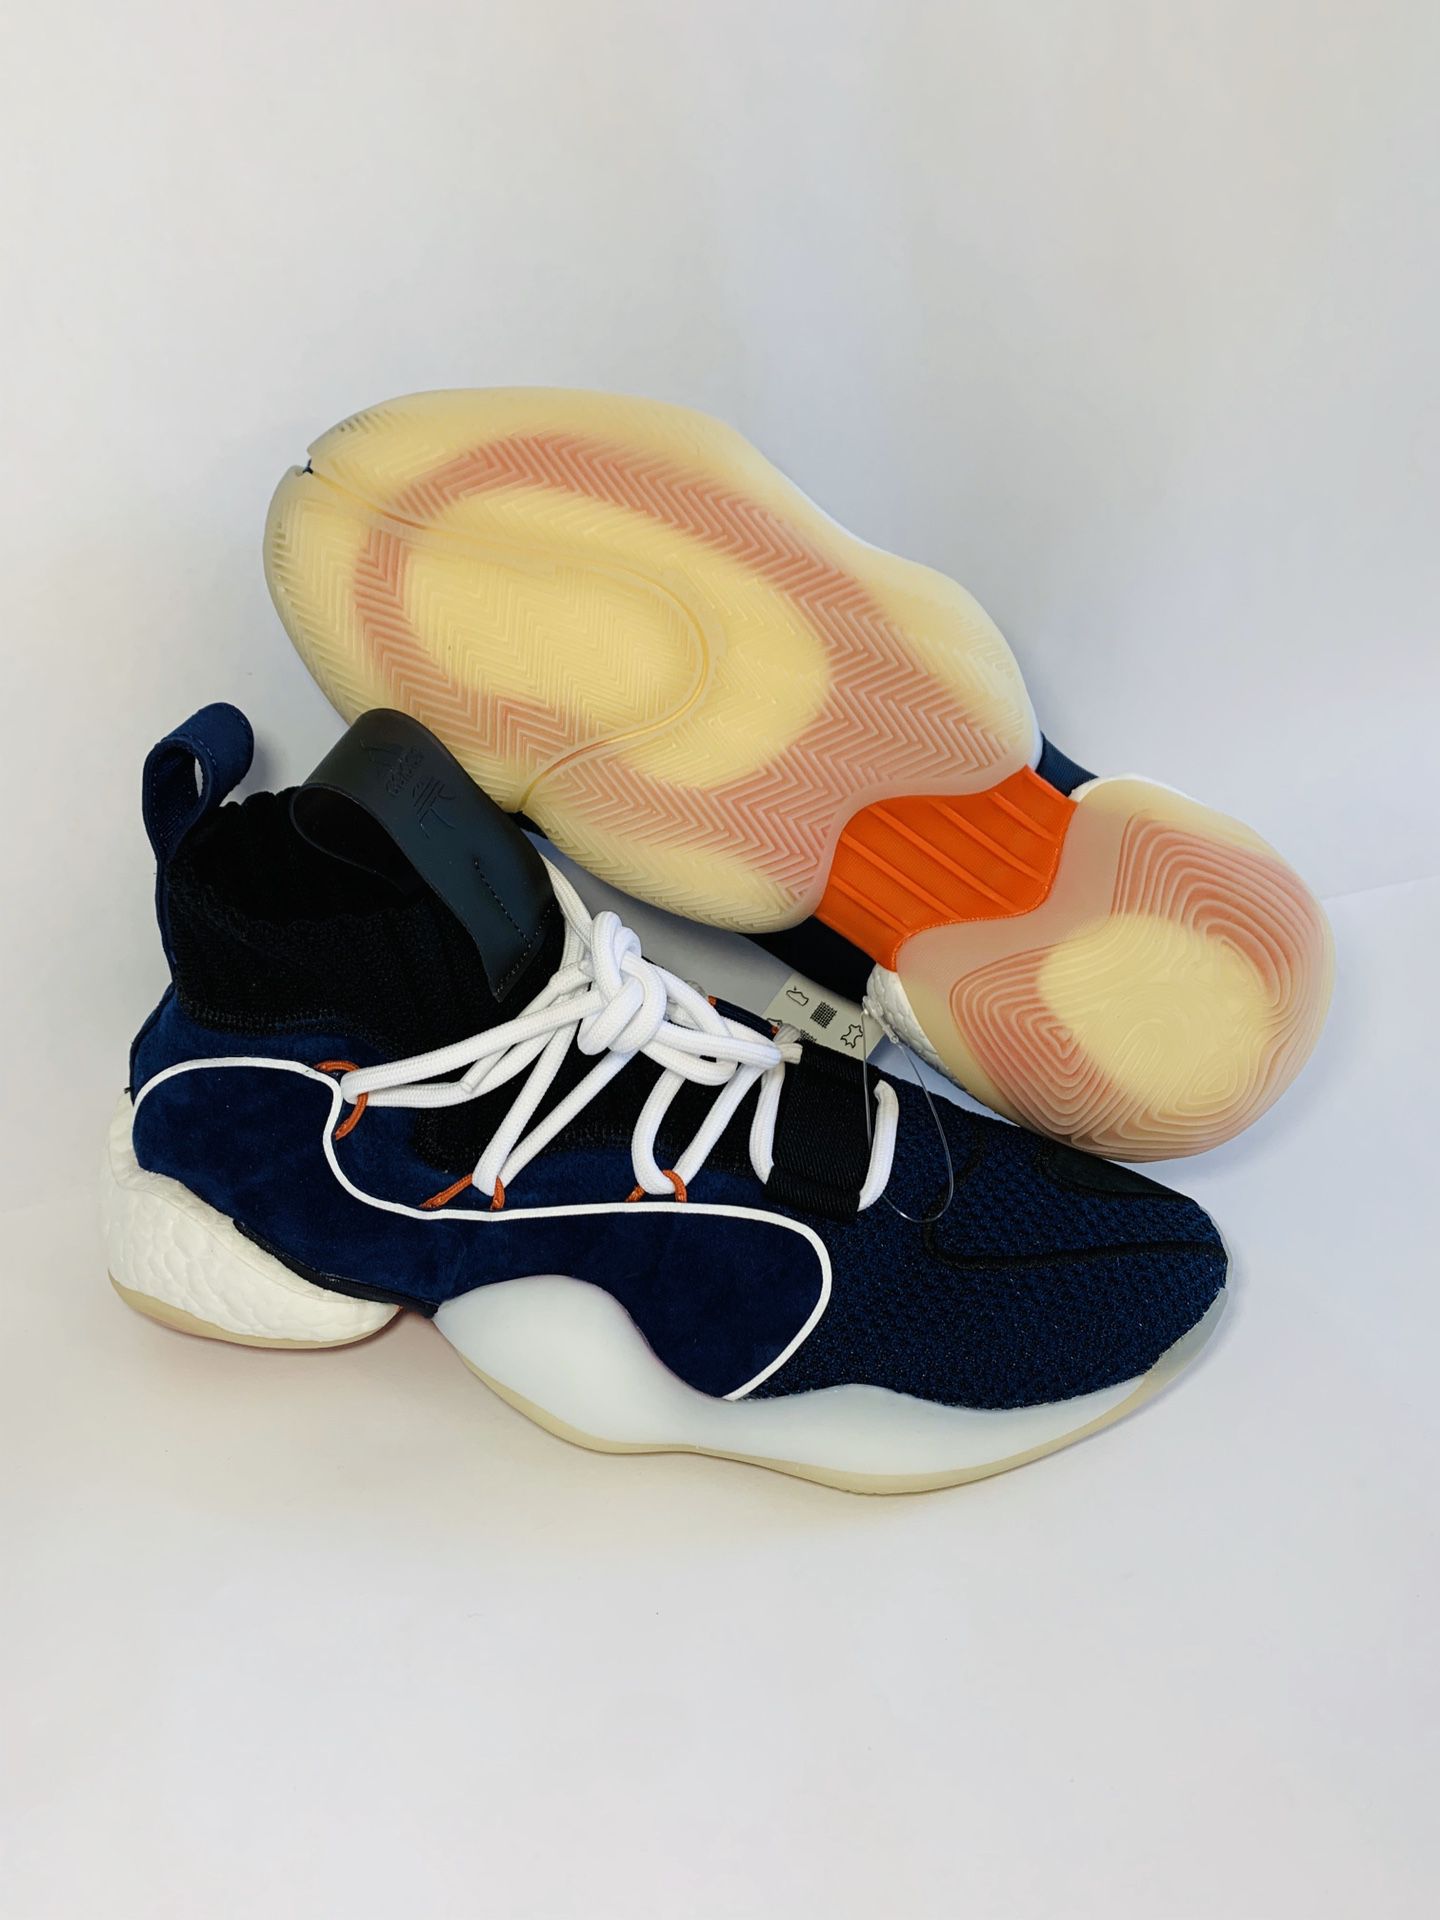 Adidas Originals Crazy BYW X basketball shoes DB2741 size: 8.5 Condition is brand New with original box, 100% authentic 2 pair available Us: 8.5 men